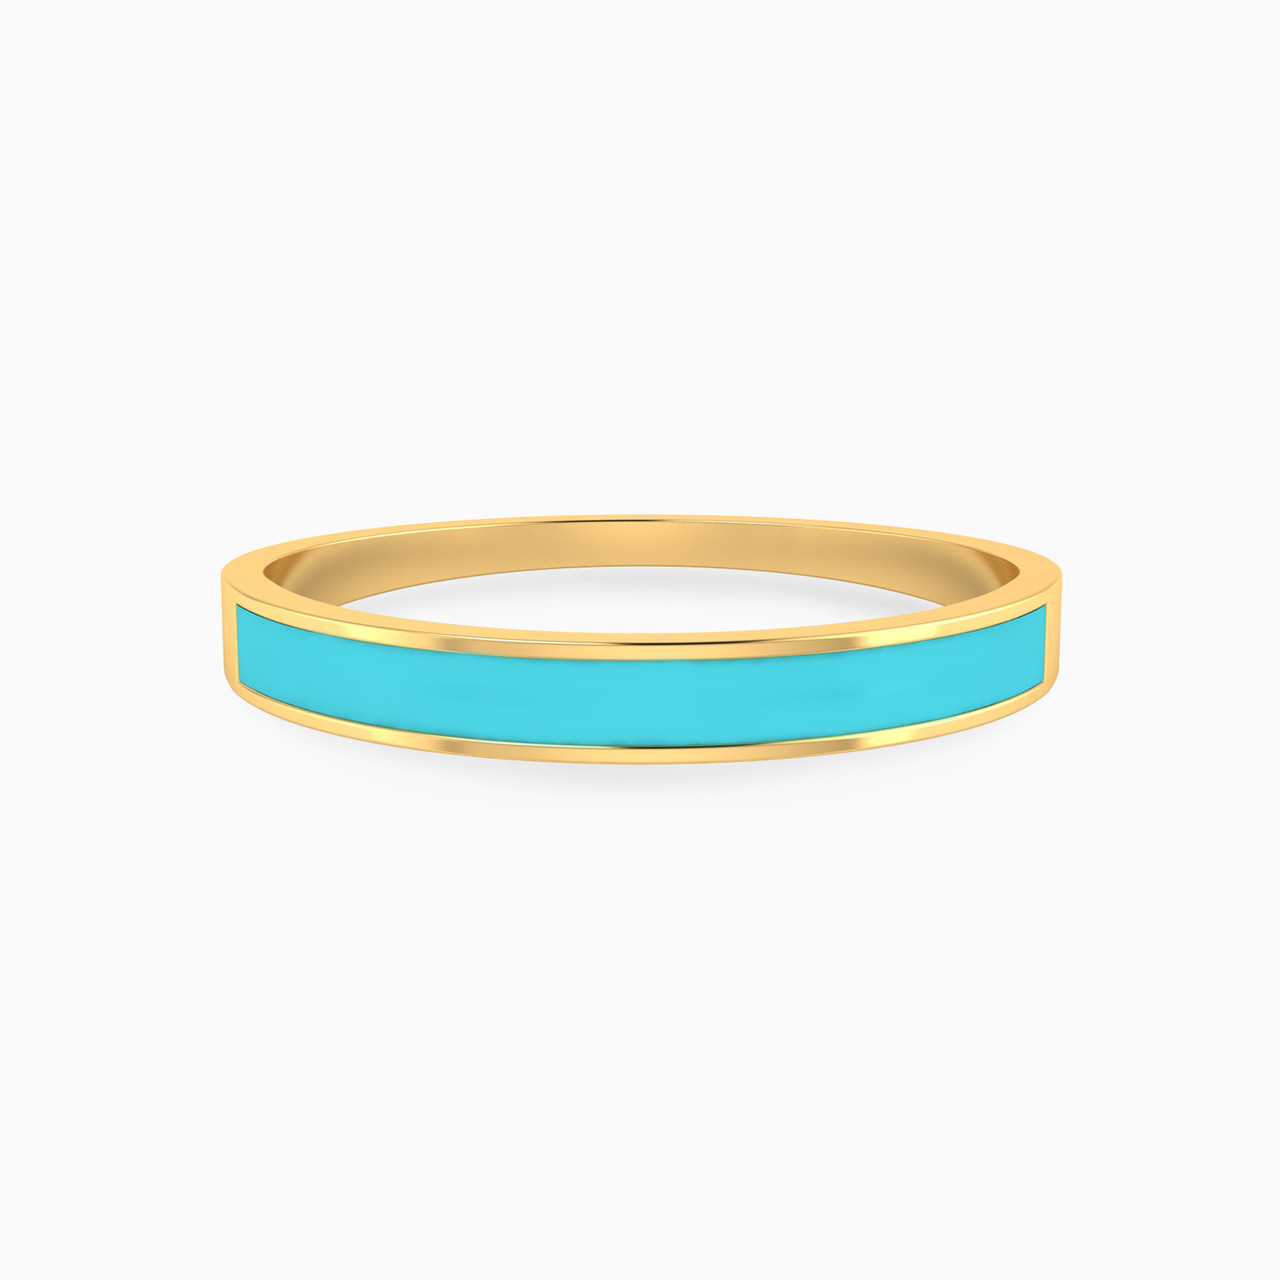 Abstract Shaped Enamel Coated Statement Ring in 14K Gold